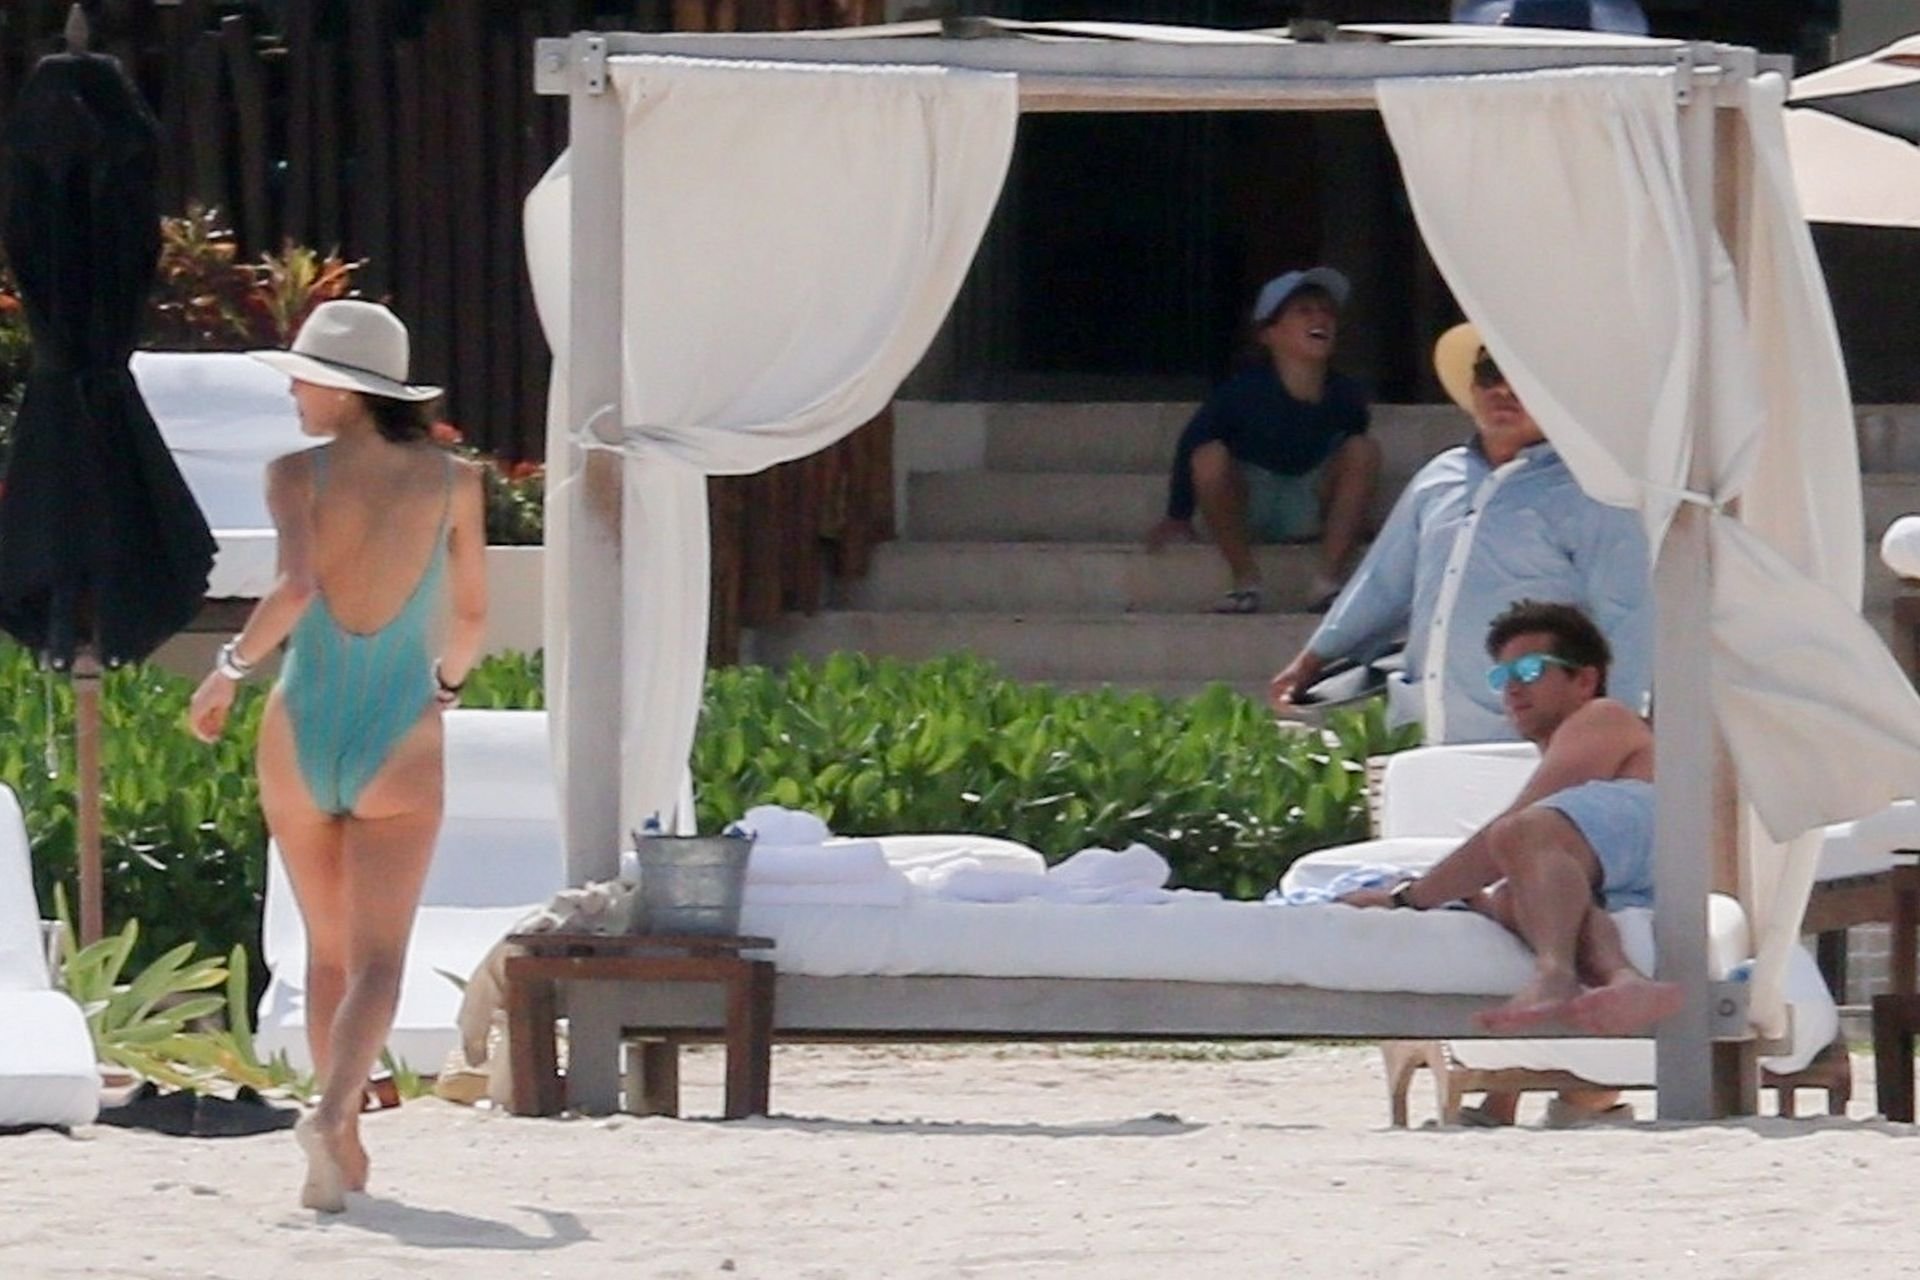 Bethenny Frankel enjoys a relaxing day at the beach with her new boyfriend ...